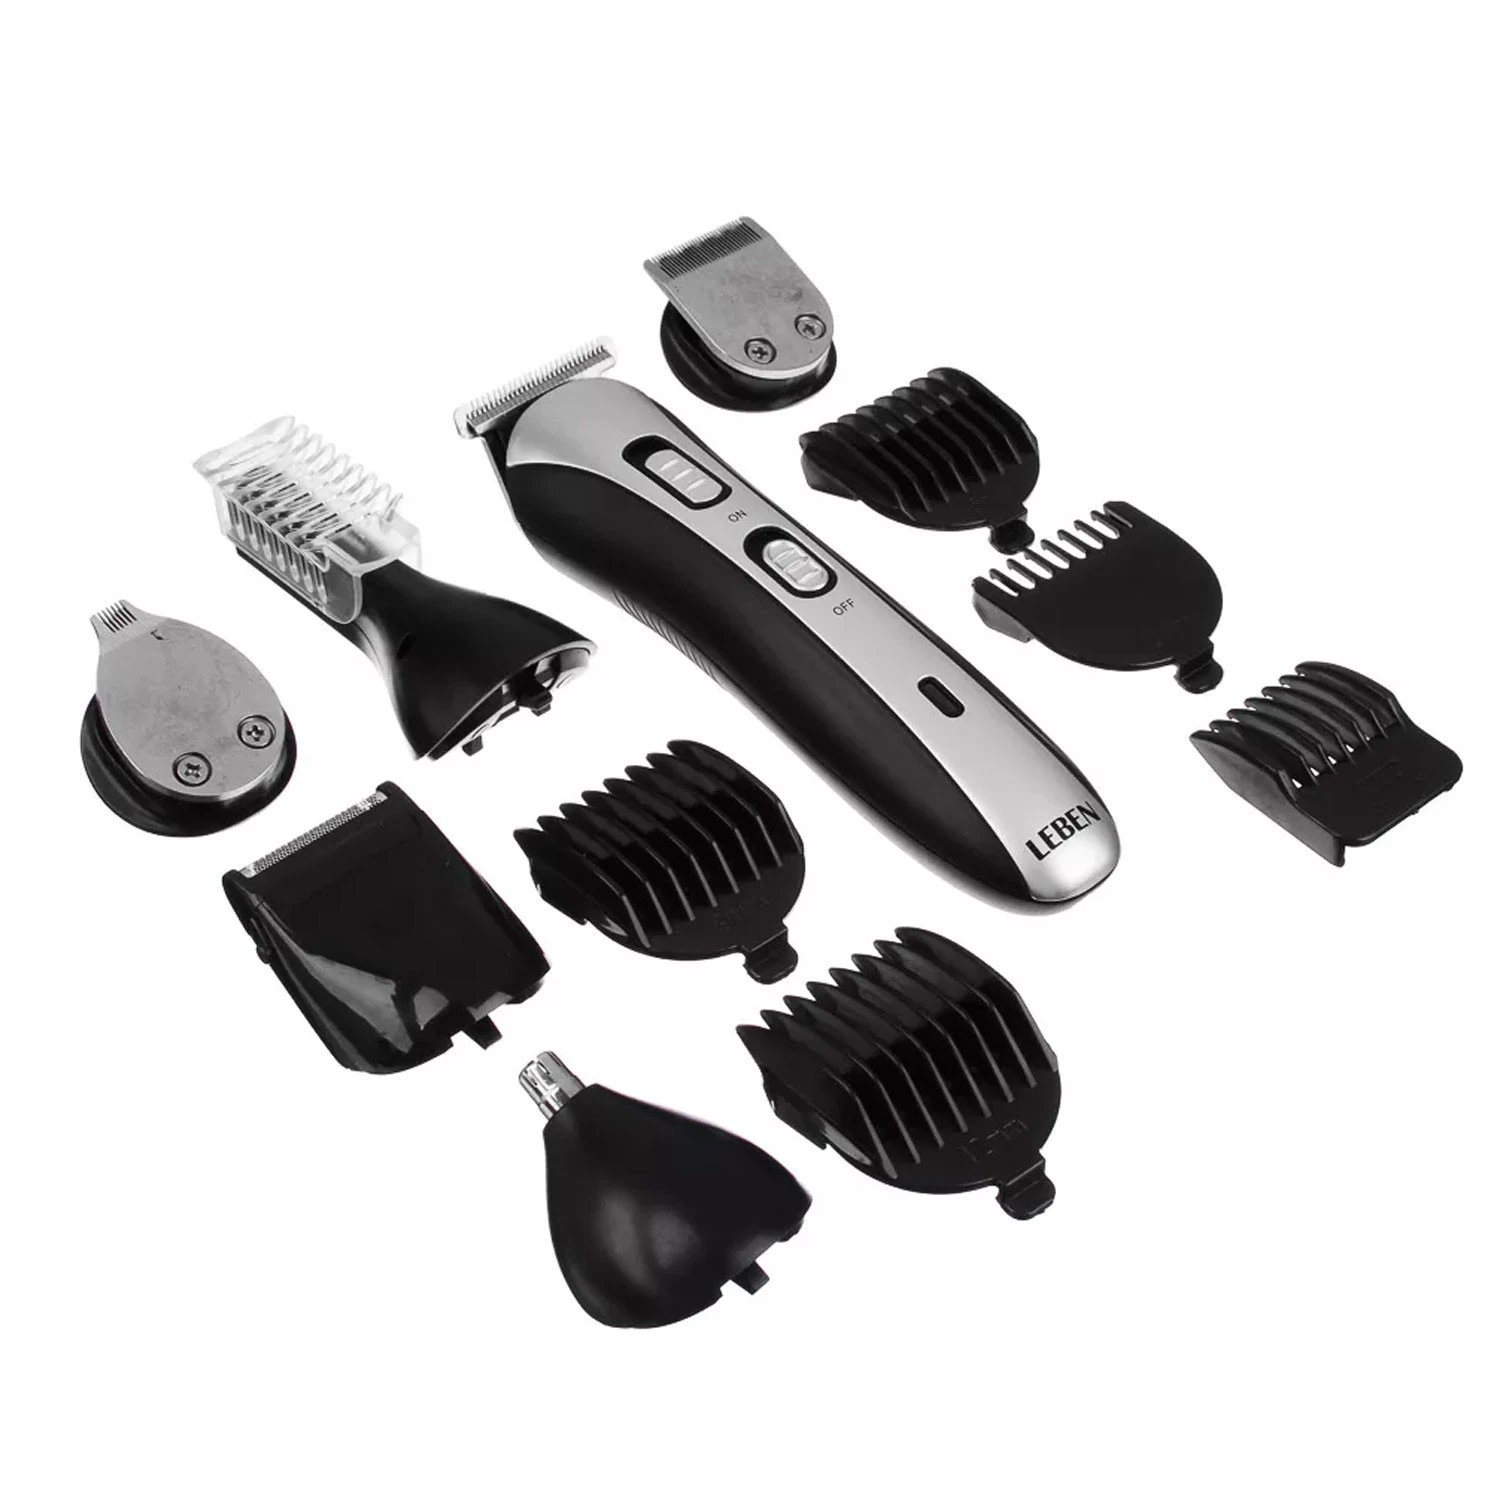 High Quality Trimming Set 6 in1 Multi Functional Washable Hair Trimmer with Replaceable Clipper Head